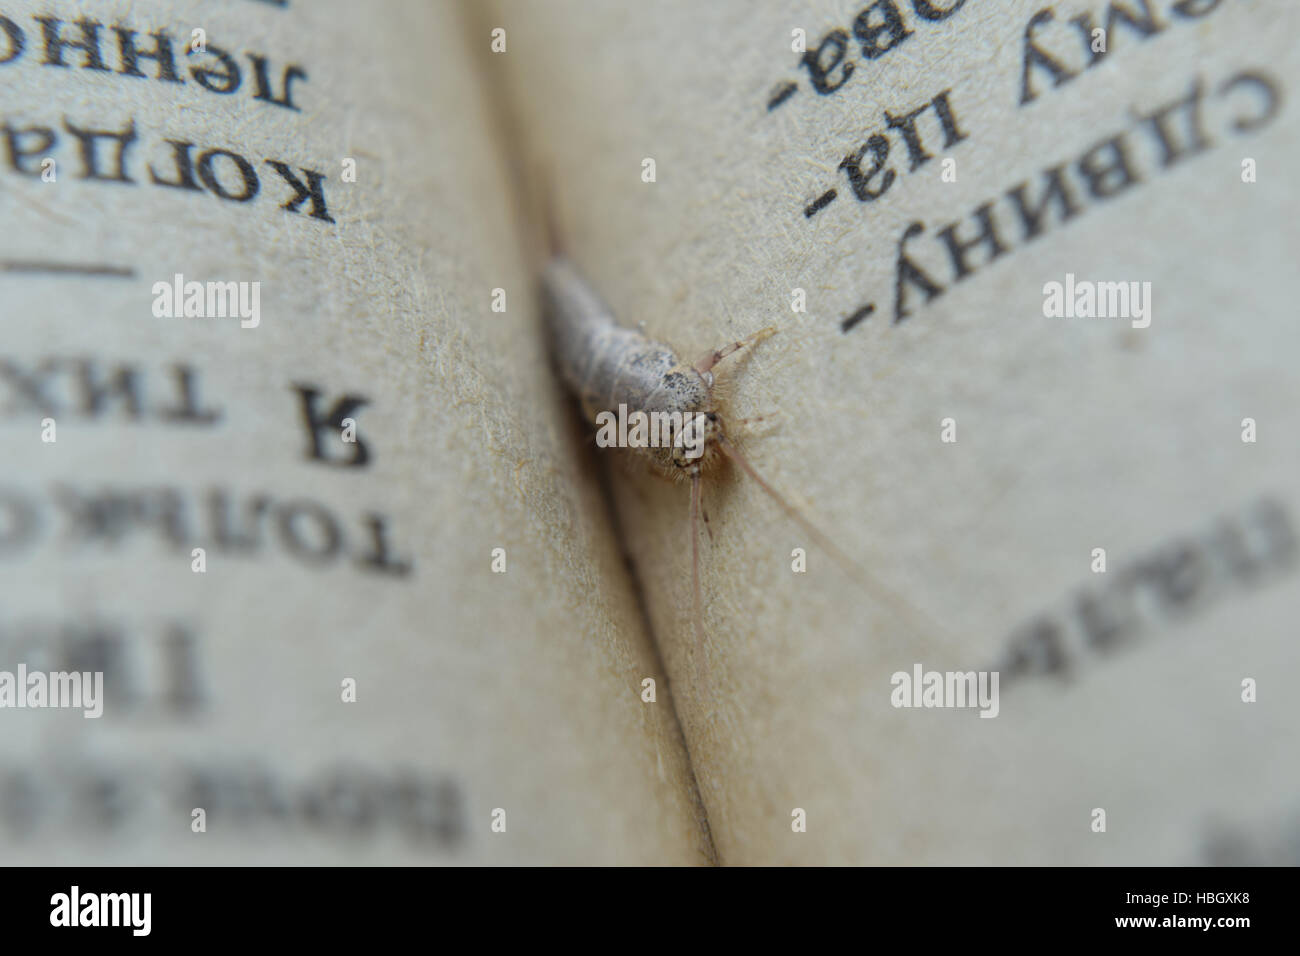 Insect feeding on paper - silverfish Stock Photo